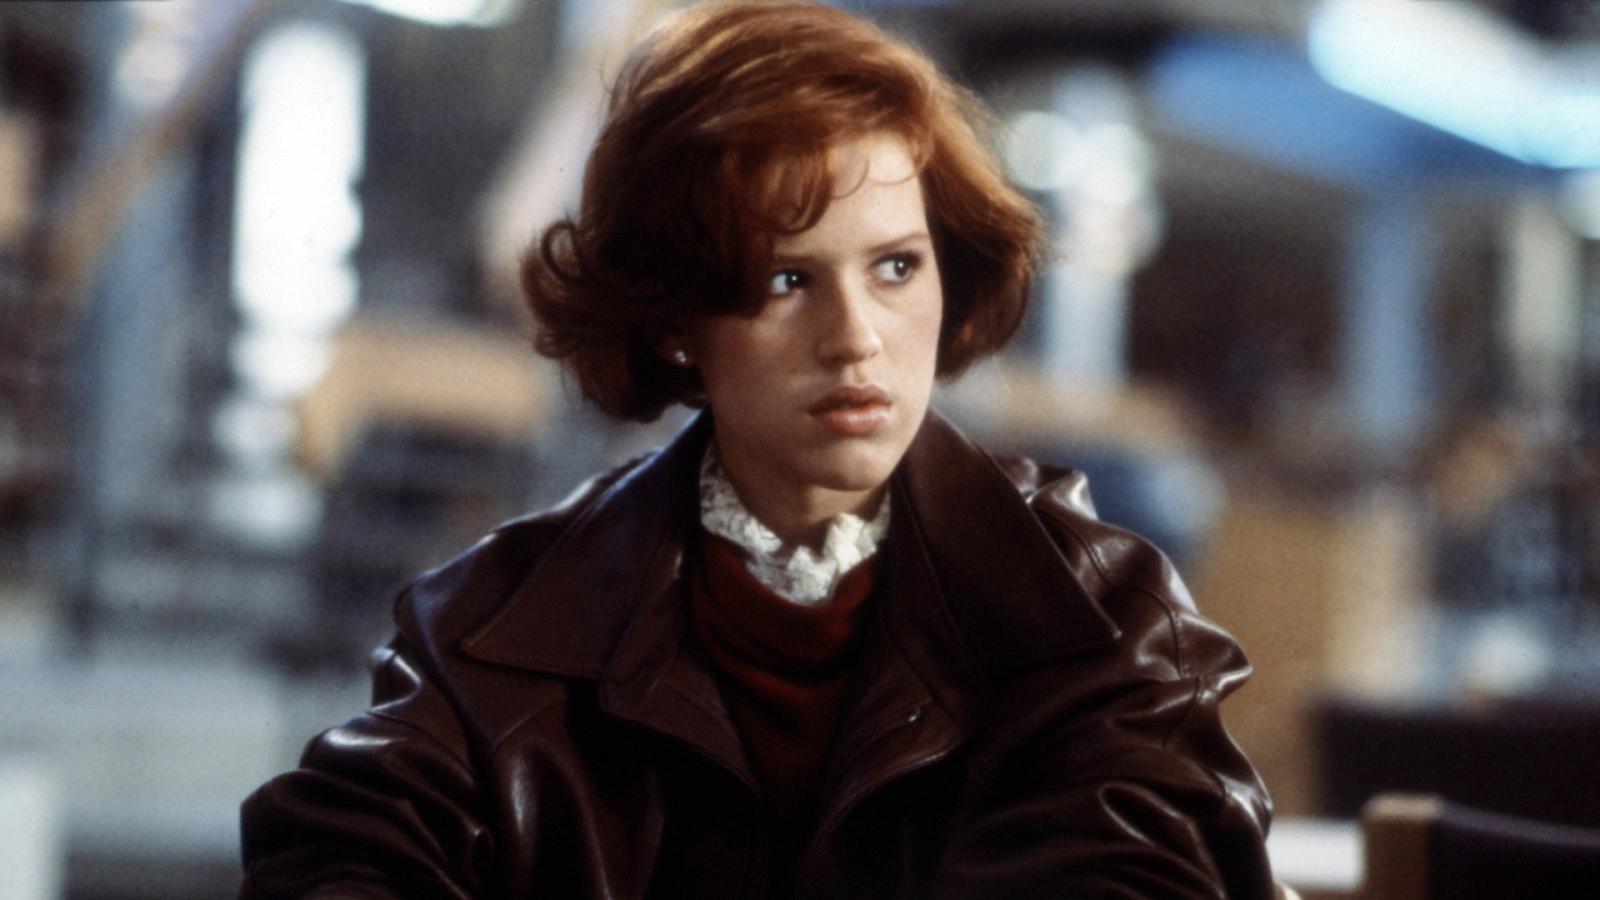 This 1985 $51-Million Classic Would Be Canceled Now, Says Molly Ringwald - image 1